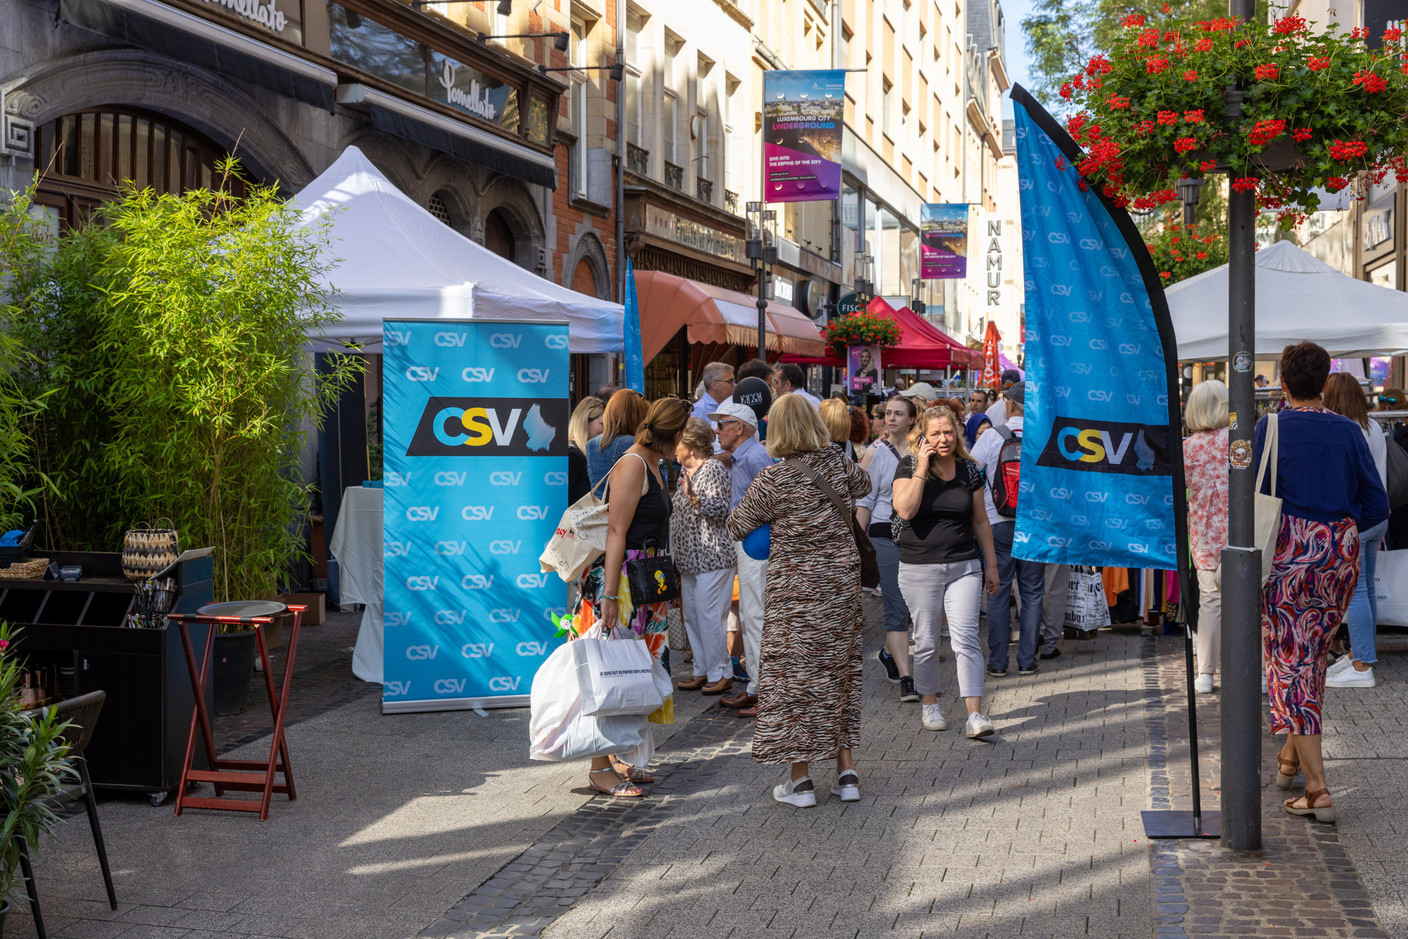 The CSV stand in Luxembourg City-Centre during the Grande Braderie (street market), a not-to-be-missed event for political parties, 4 September 2023. Photo: Romain Gamba / Maison Moderne